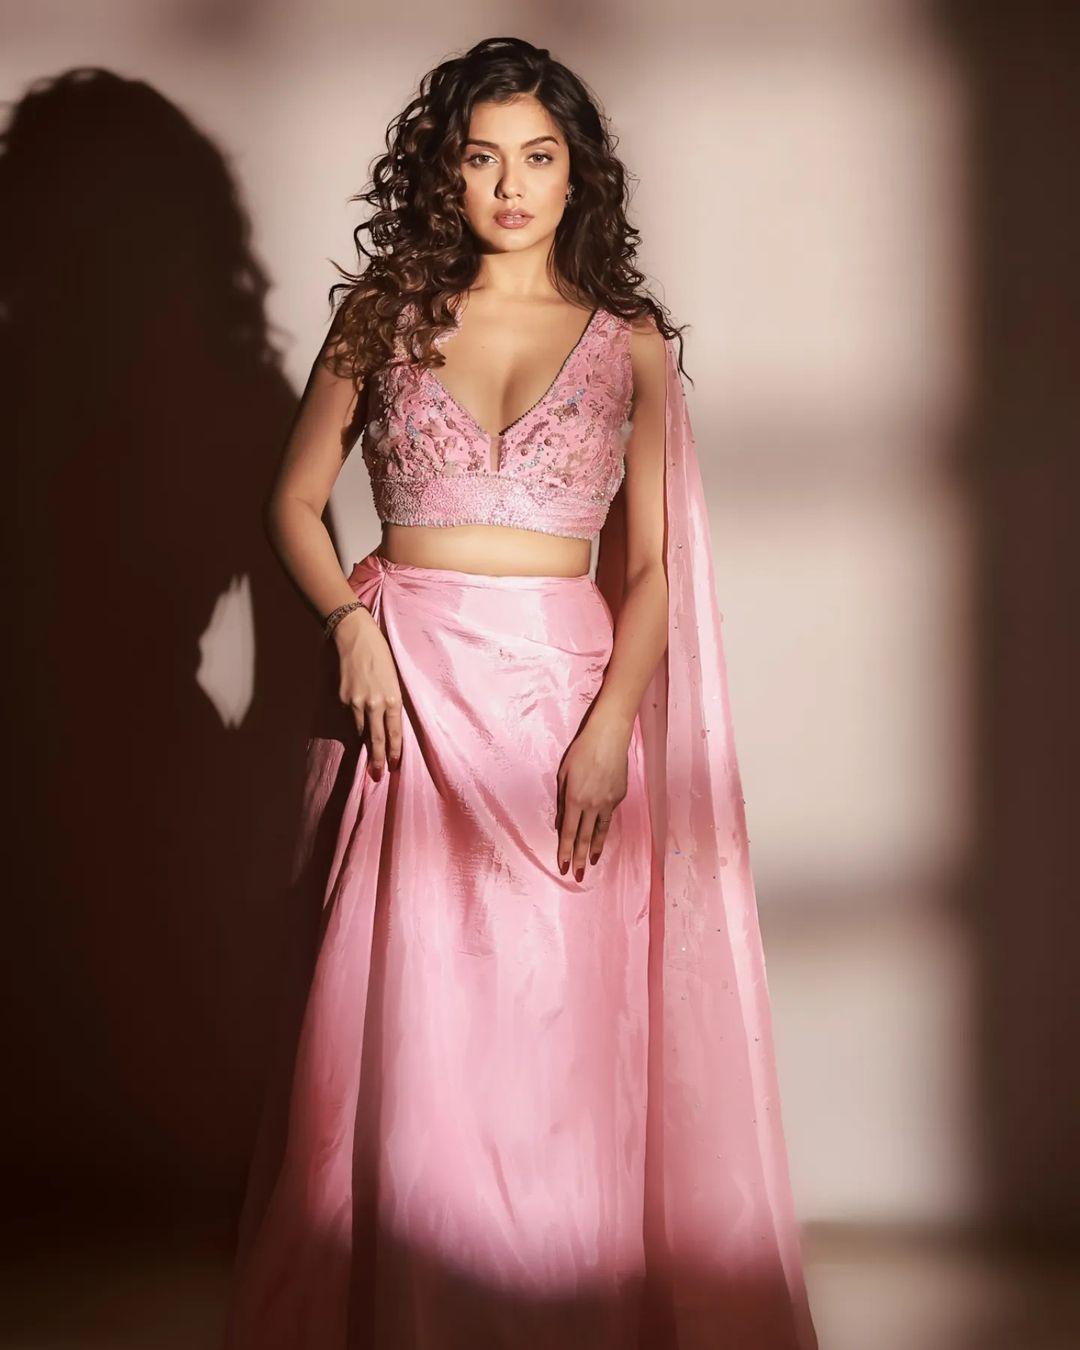 Notably, the lehenga is adorned with a sizable matching trail, adding a touch of grandeur. Divya left her hair open in deep curls and opted for nude makeup, creating an ethereal appearance